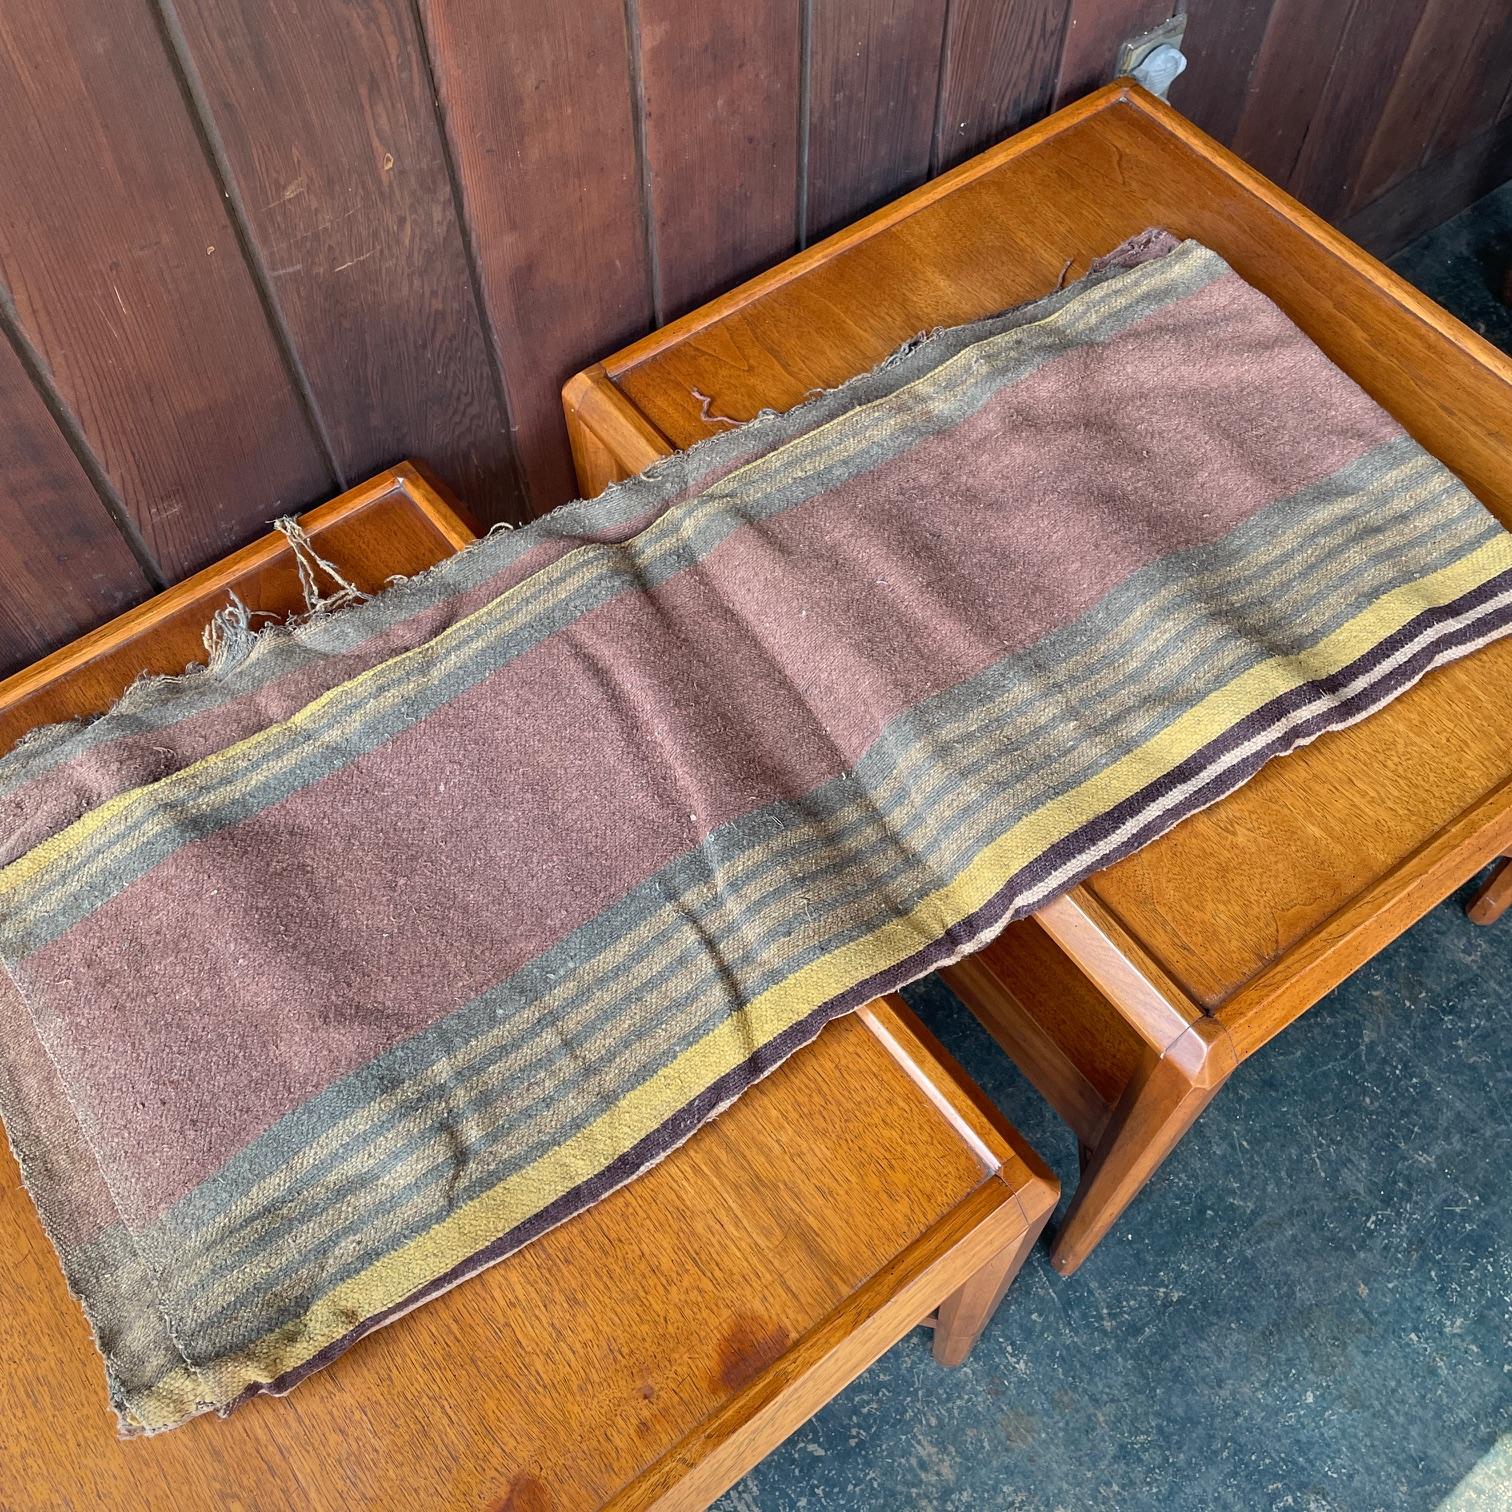 Antique 19th Century Navajo Chief Hand Woven Wool Blanket Stripe Earthtones In Distressed Condition For Sale In Hyattsville, MD